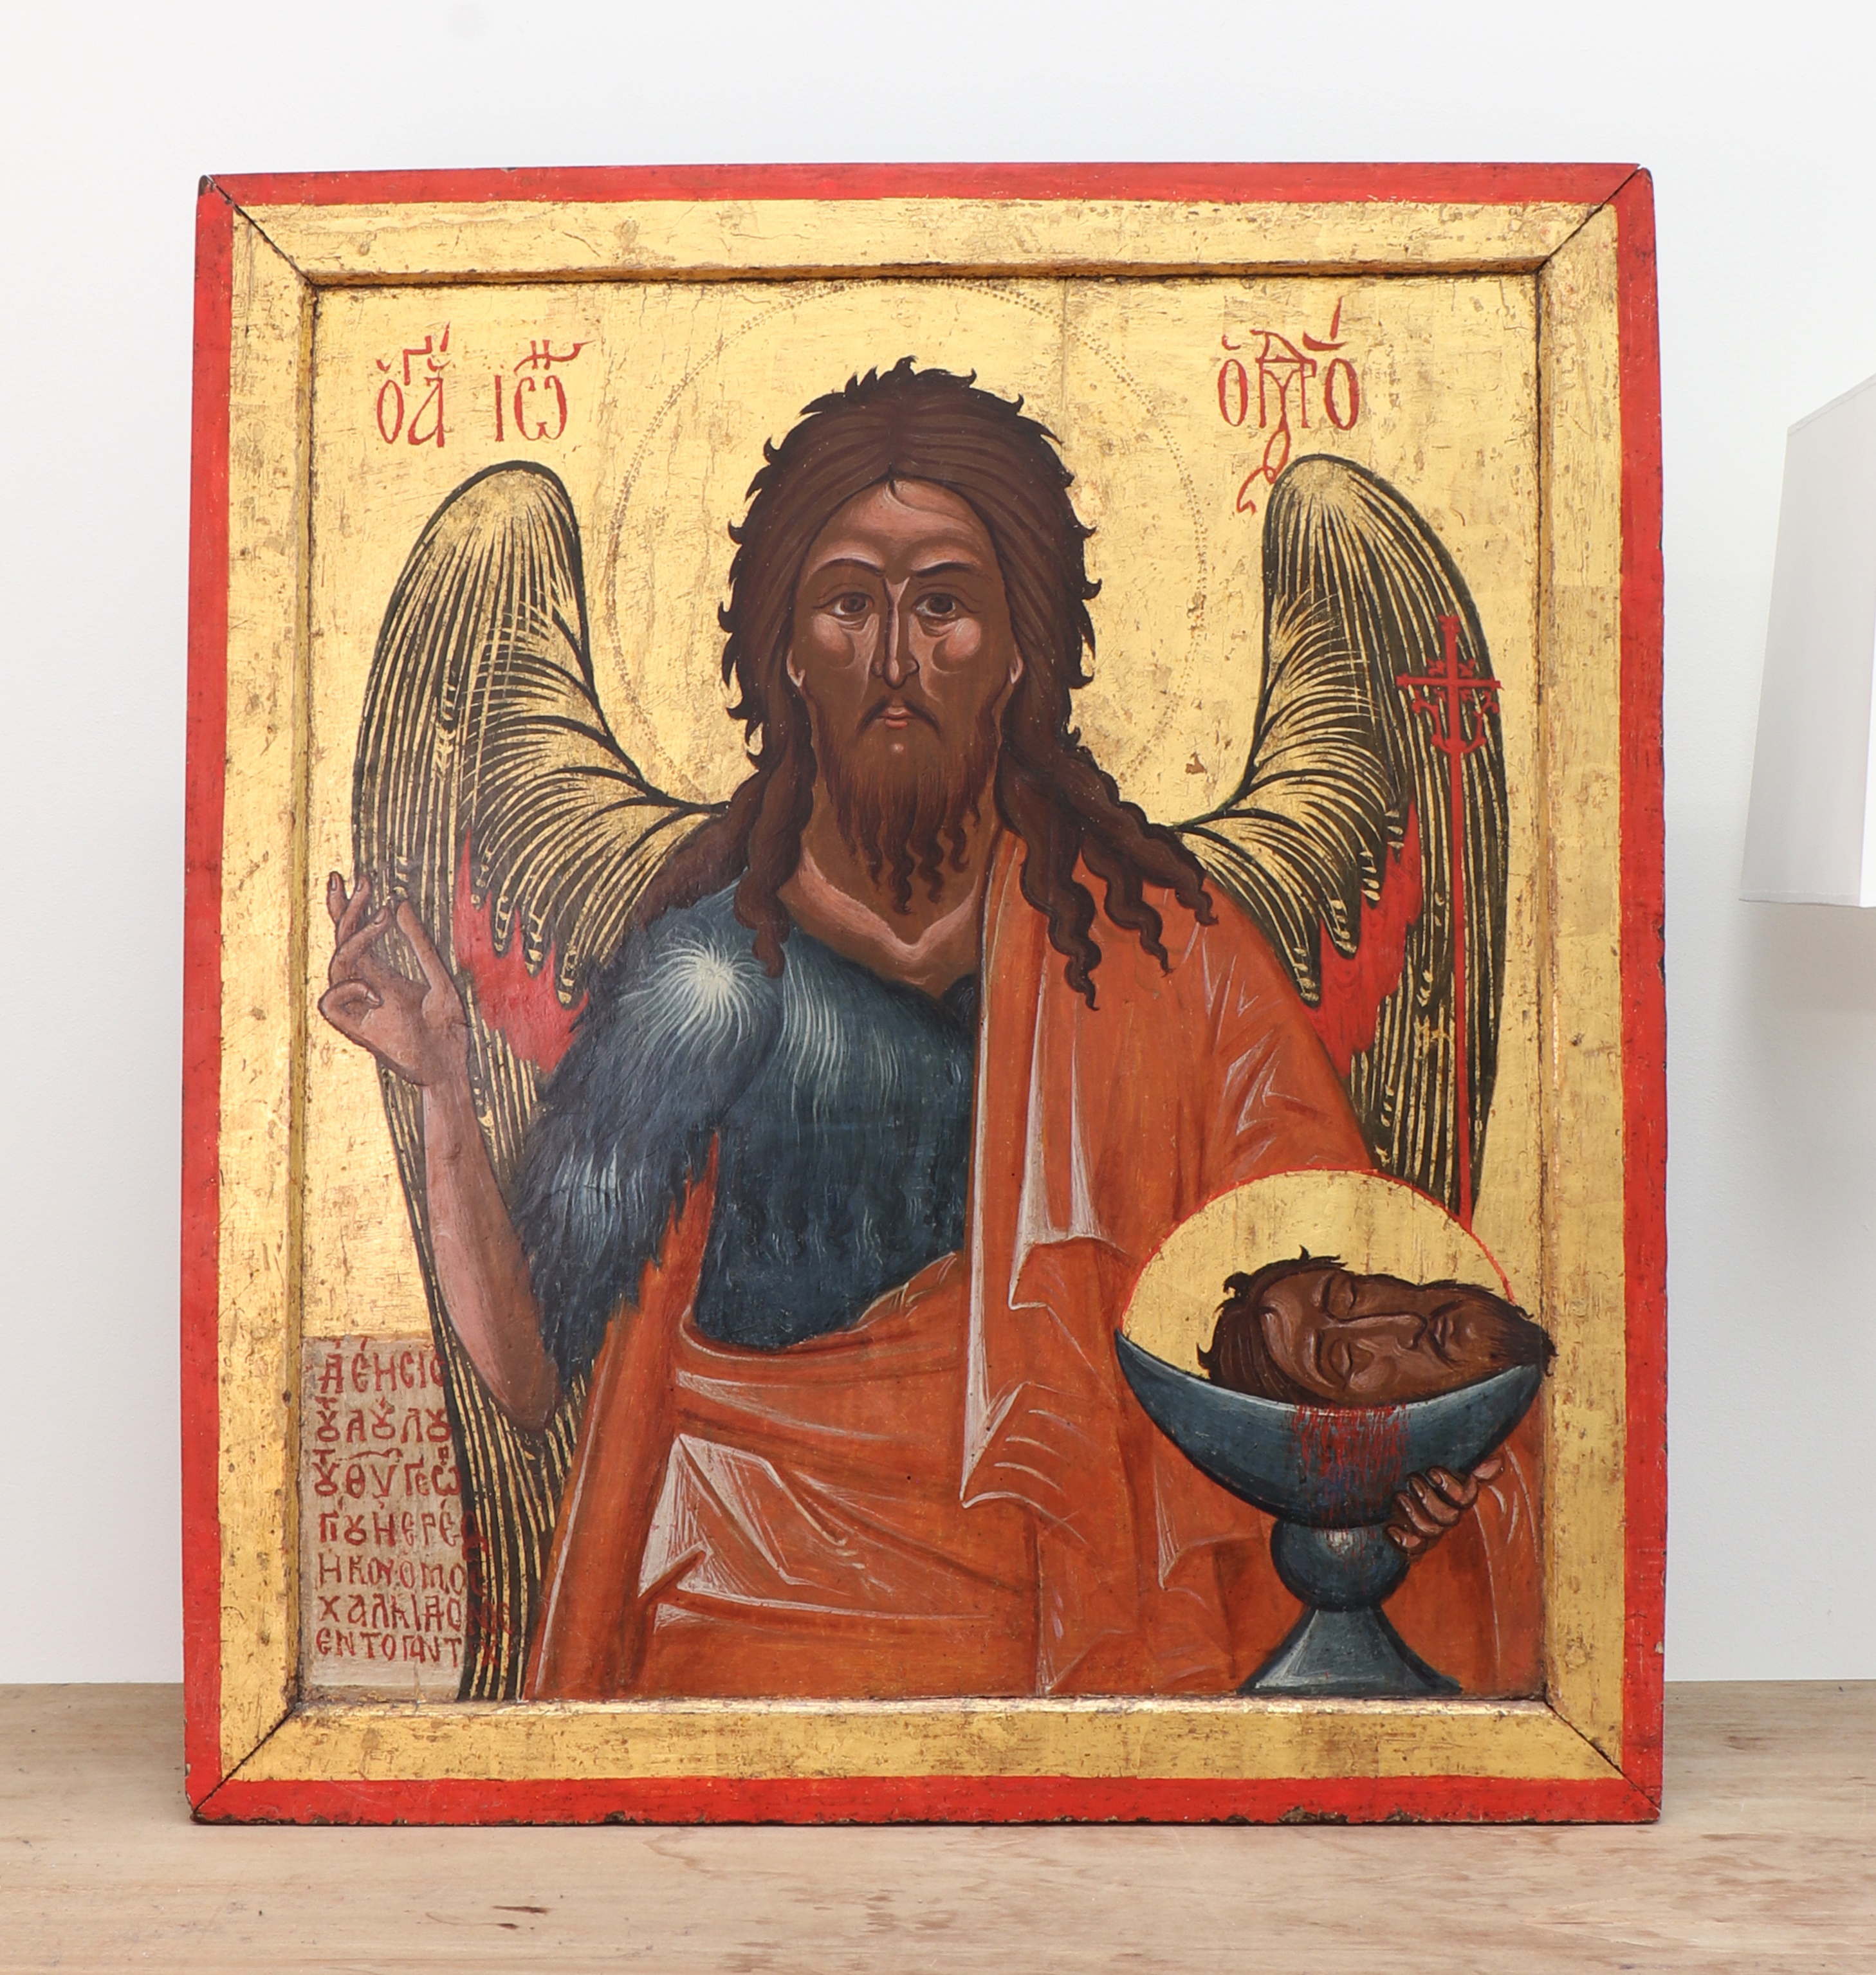 A large icon of St. John the Forerunner